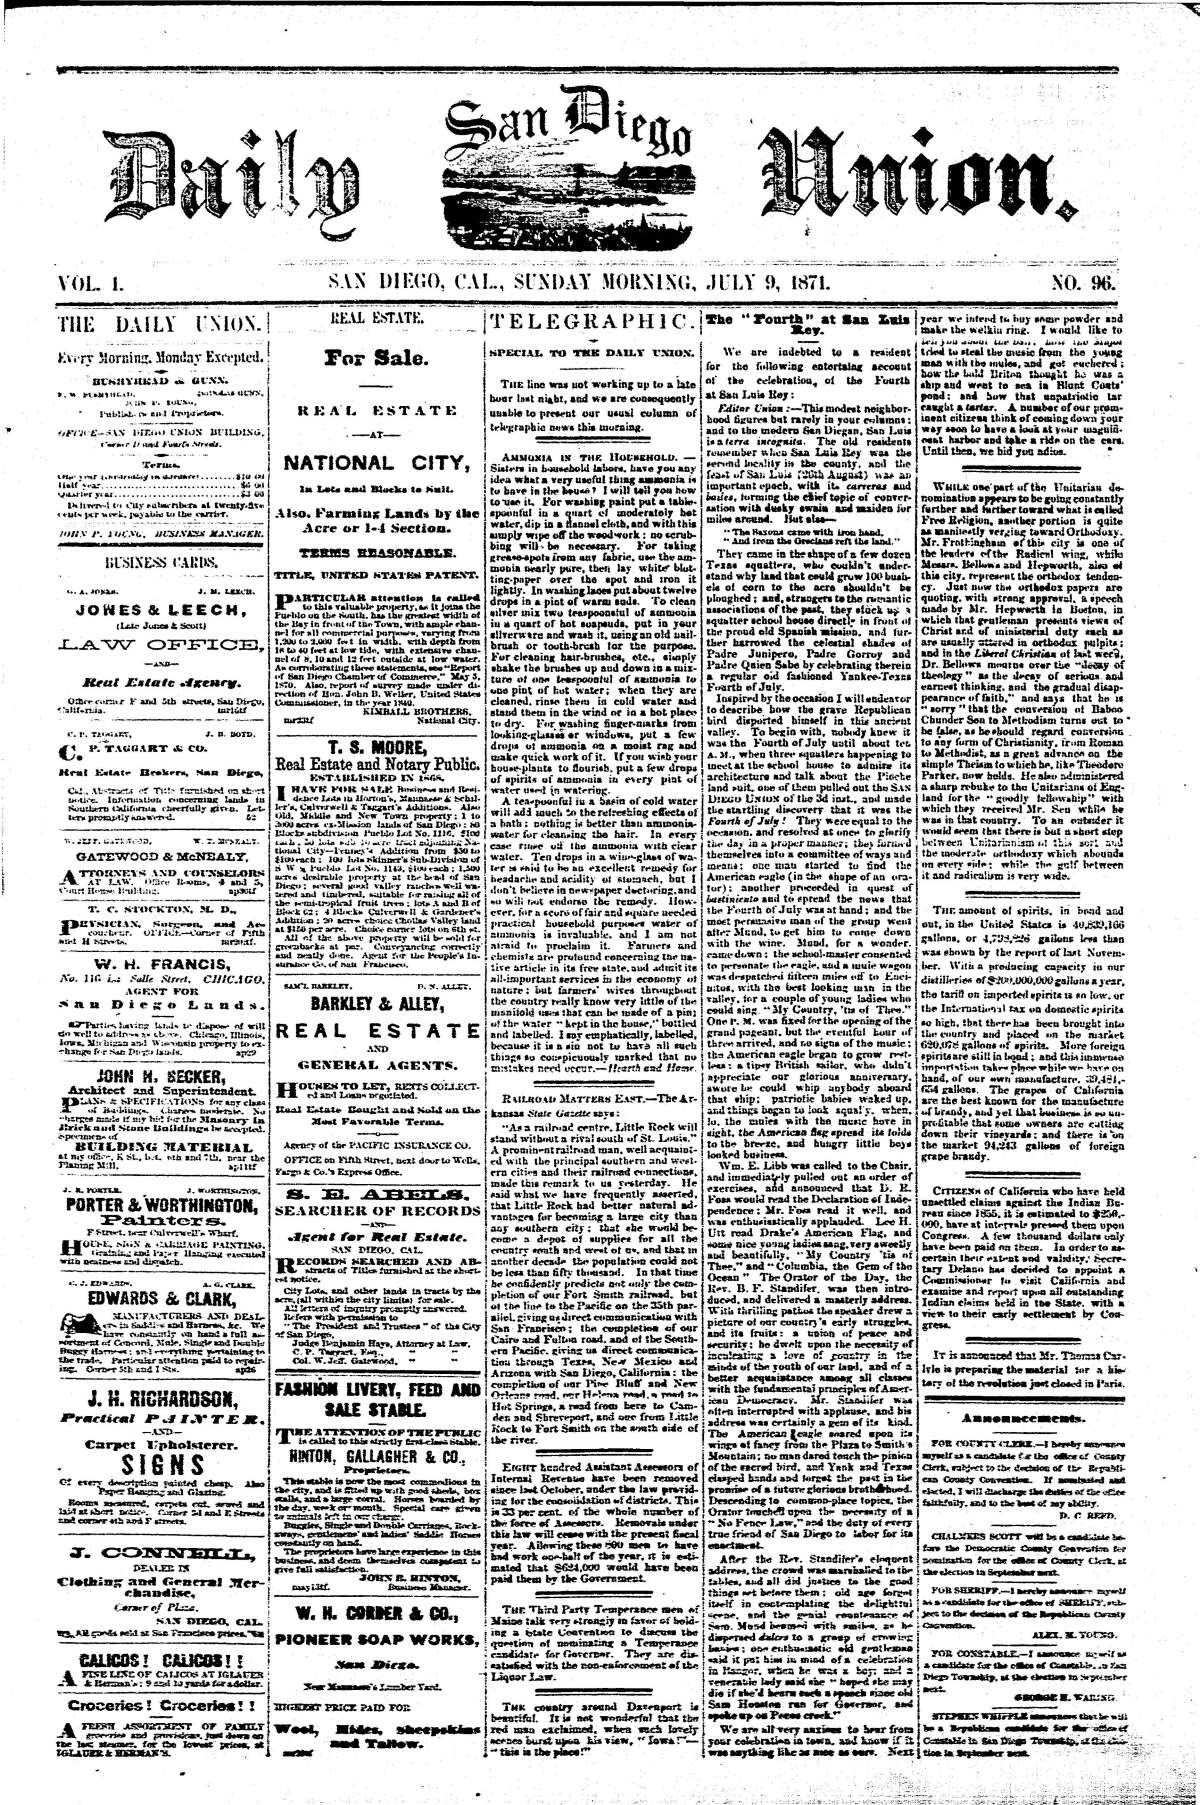 Front page of the Daily San Diego Union, July 9, 1871.